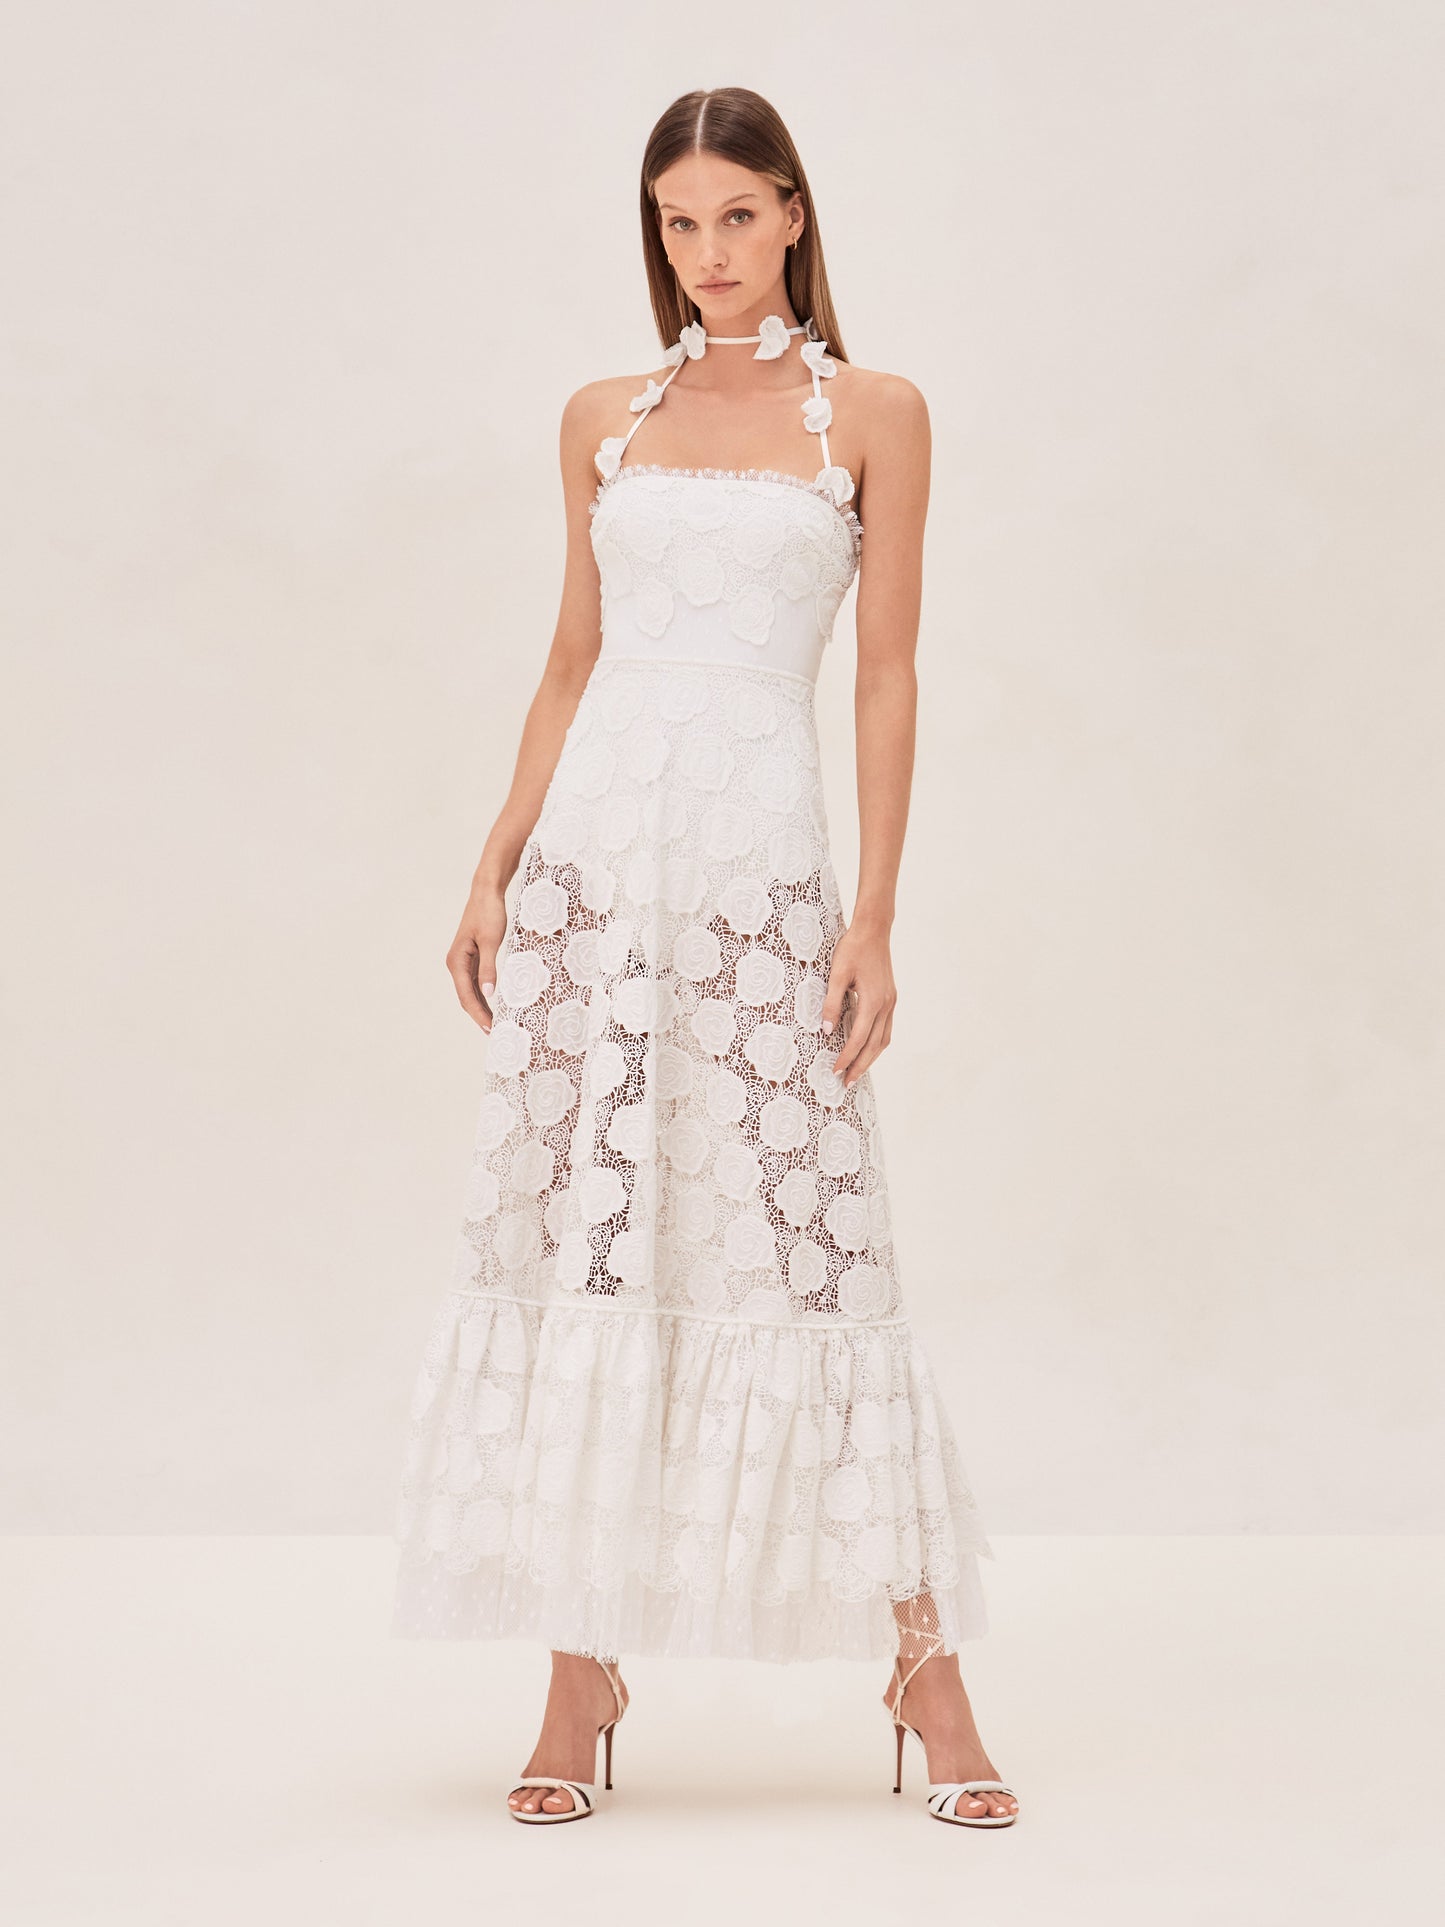 Shopalexis white lace midi dress with floral patterns and halter neck